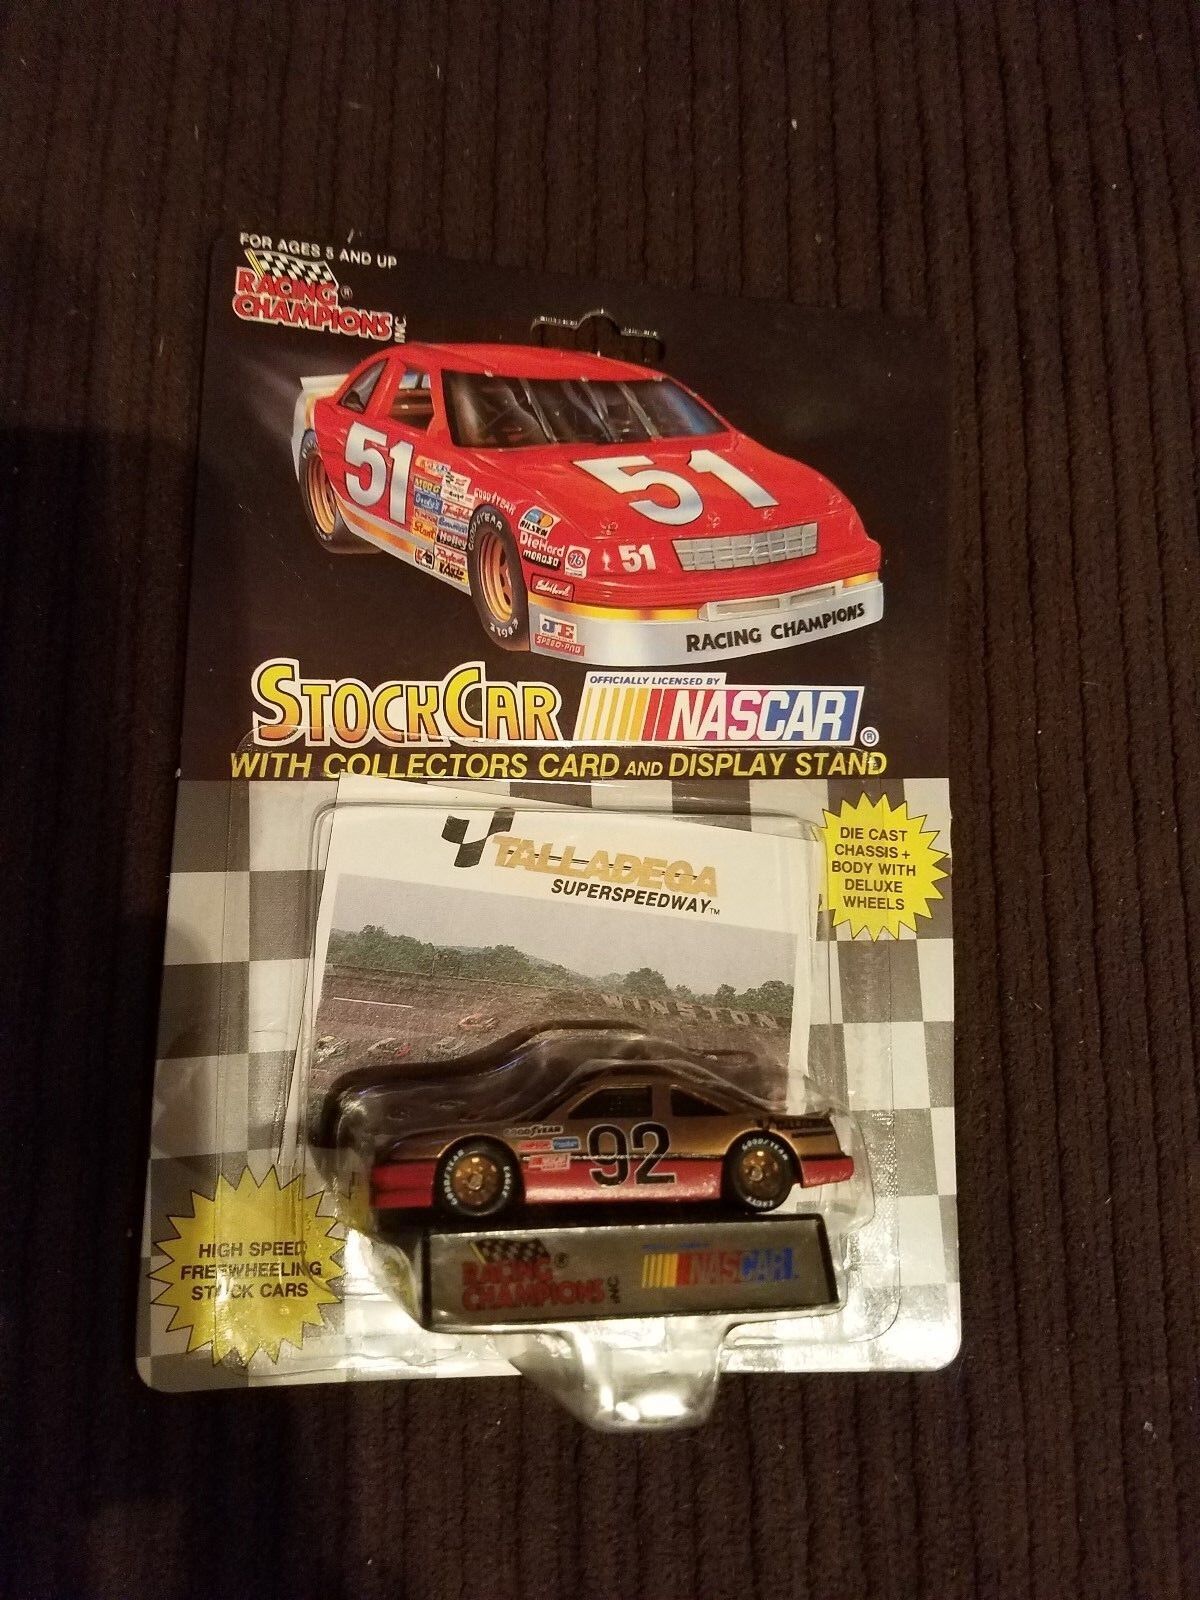 1992 Racing Champions Stock Car Talladega Speedway with Collectors Card